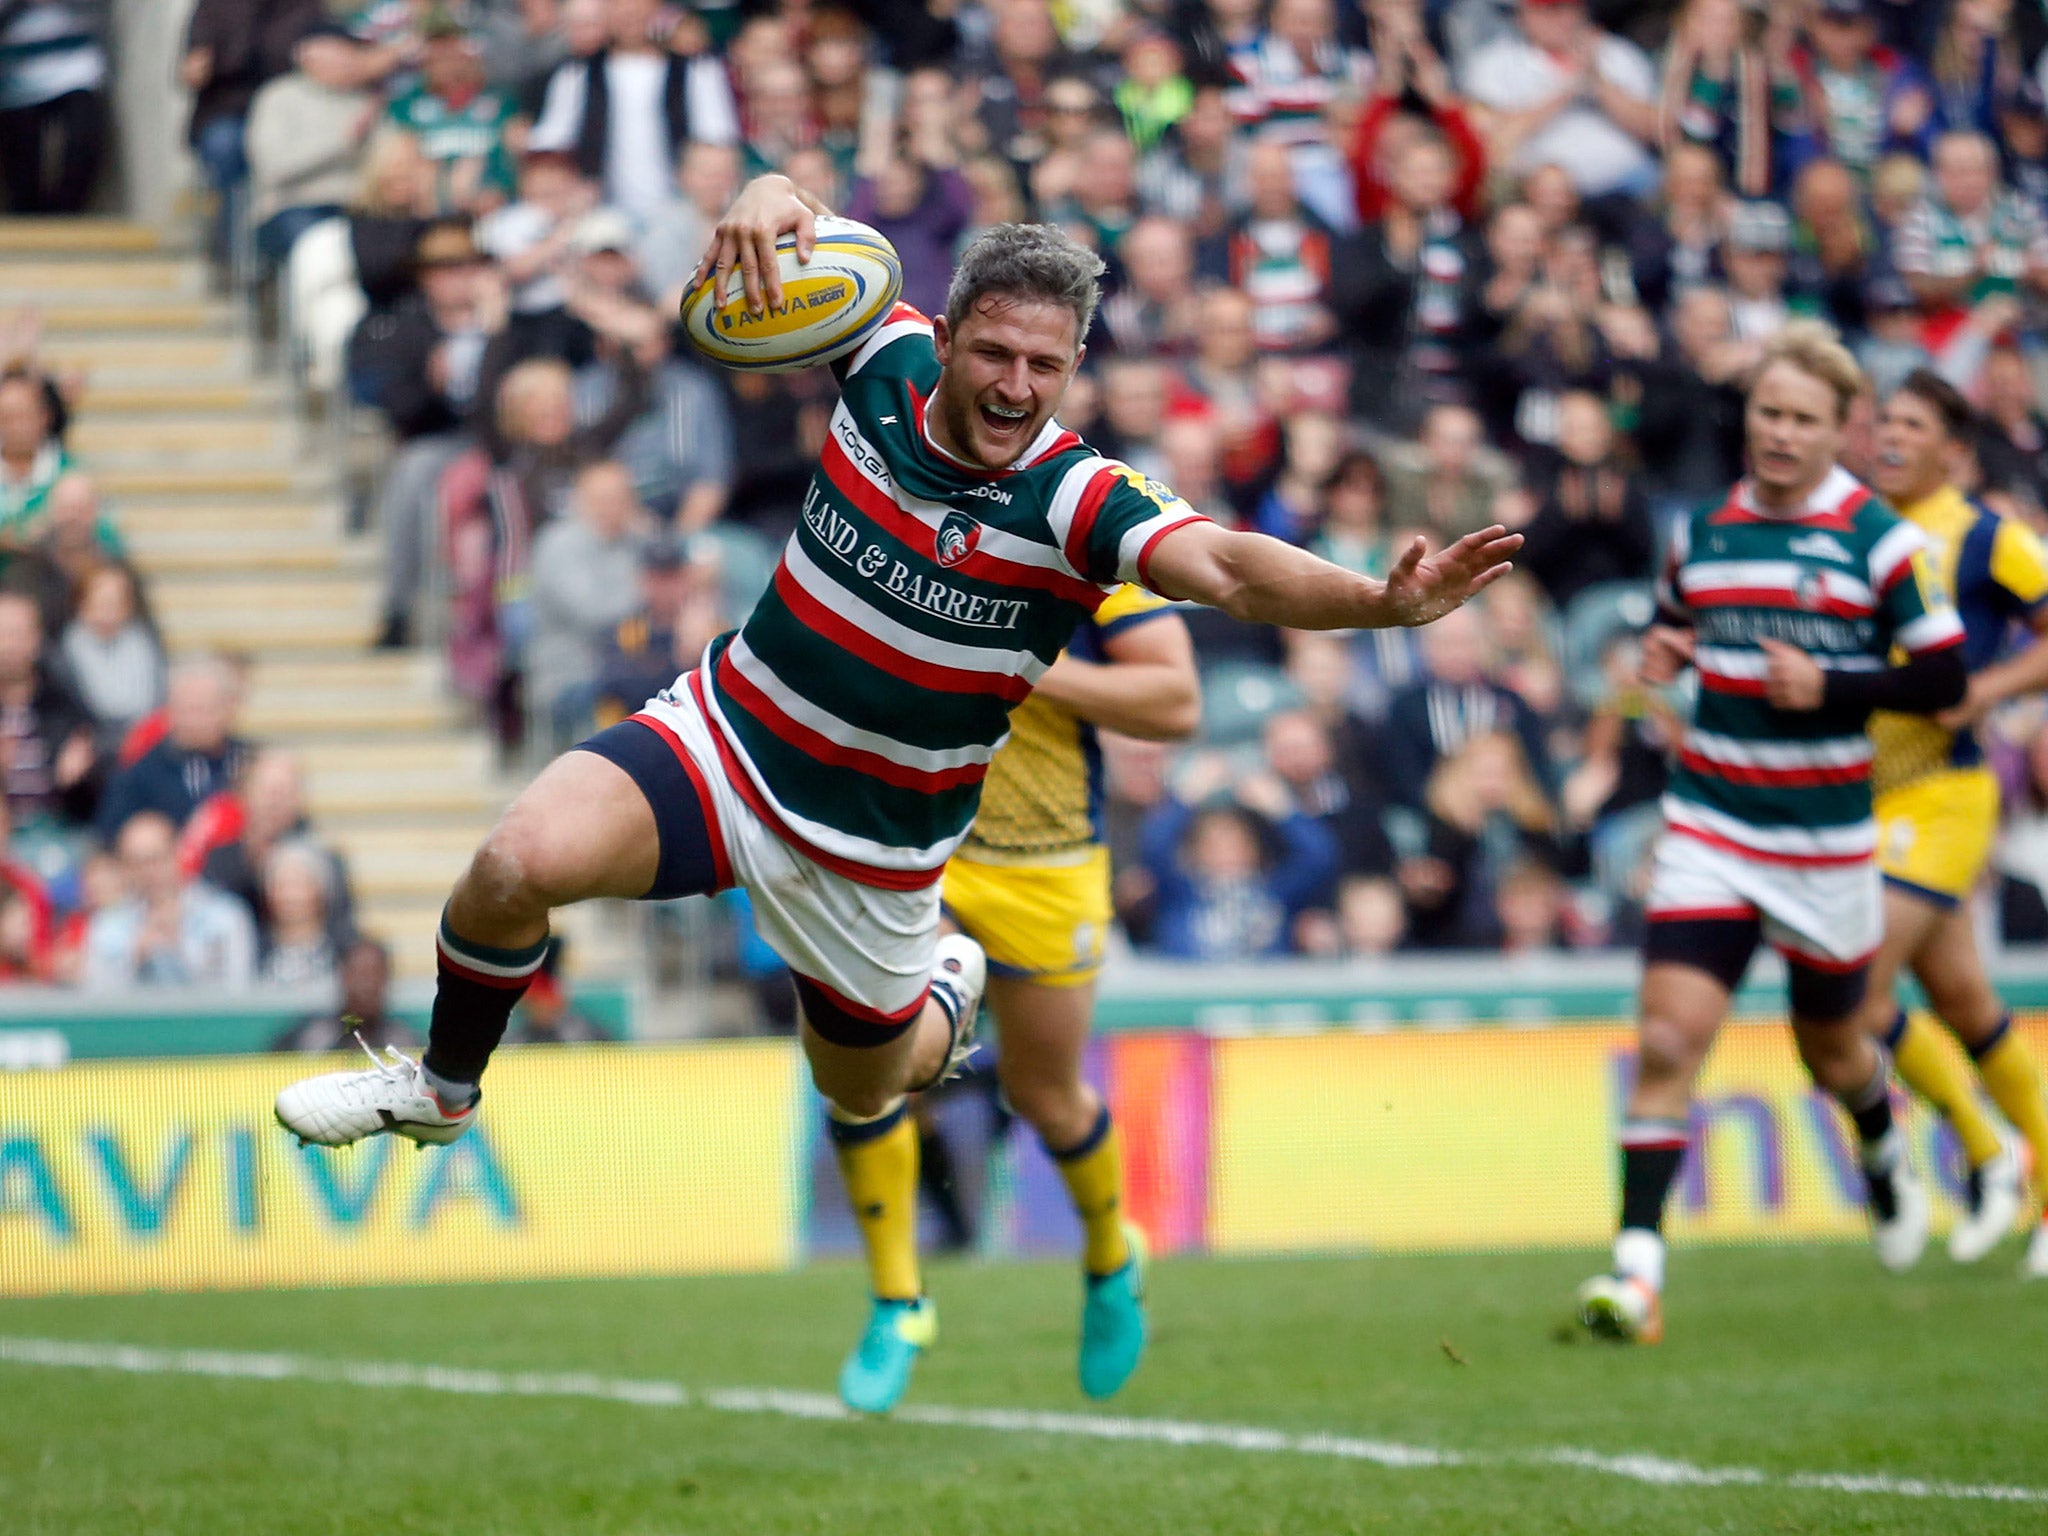 Tom Brady dives over the line to score a try for Leicester Tigers against Worcester Warriors